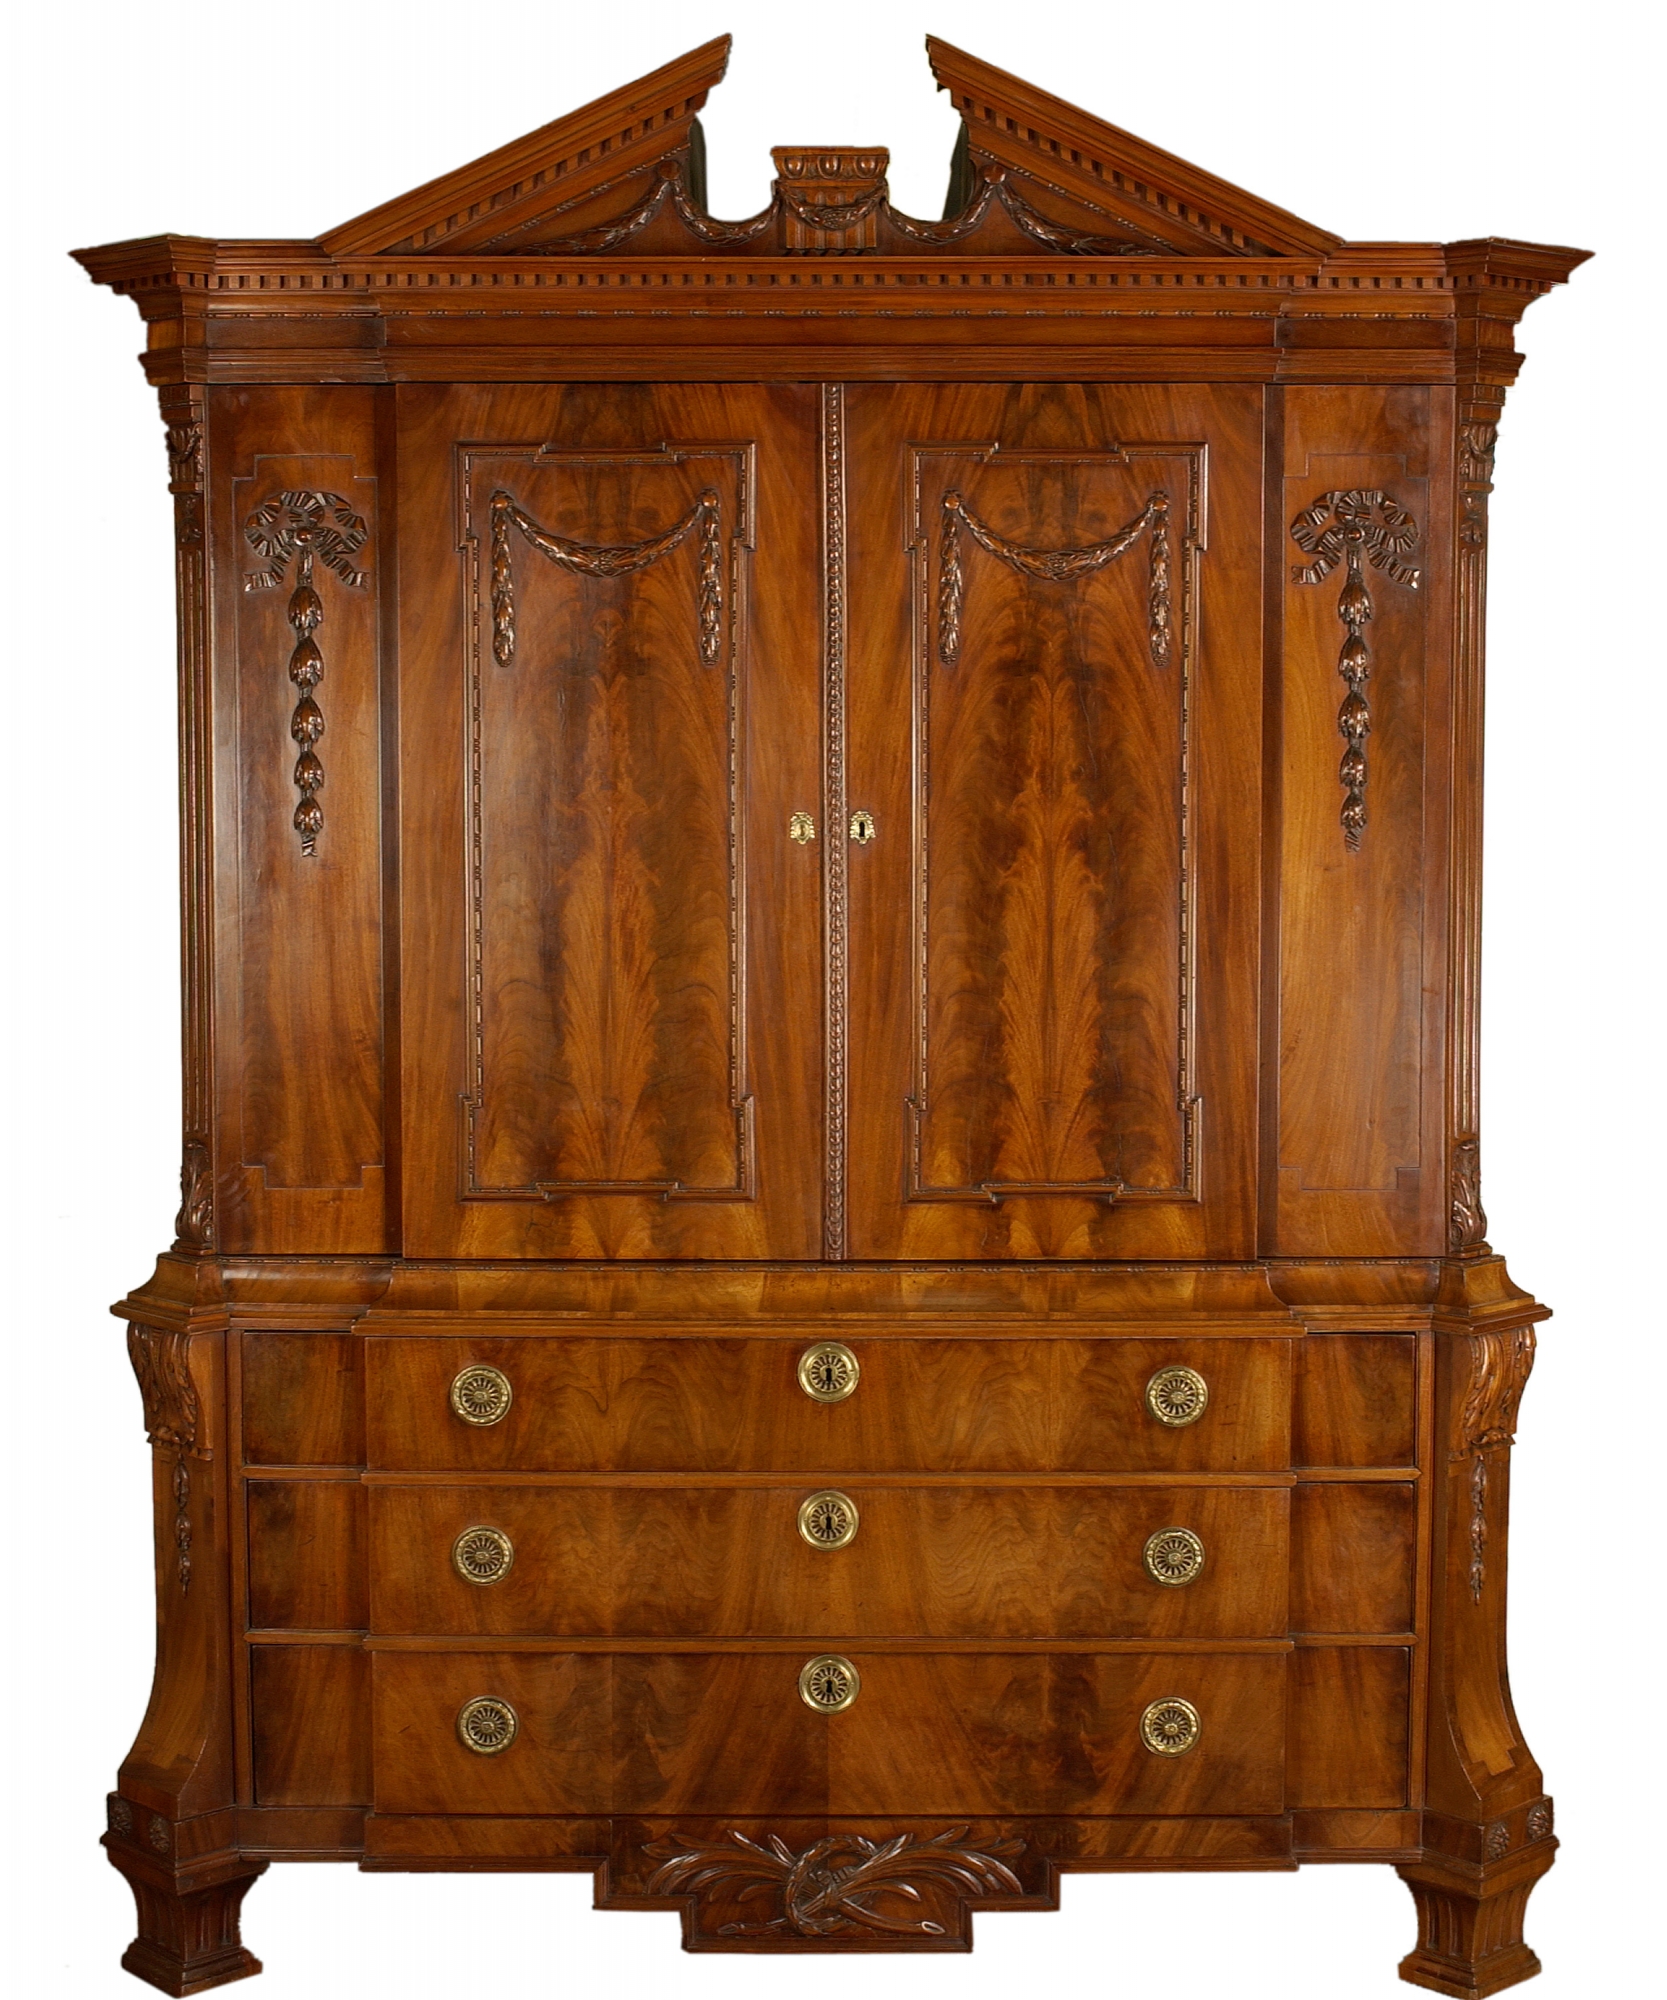 A Neoclassical Break Front Cabinet With Broken Timpan Artlistings